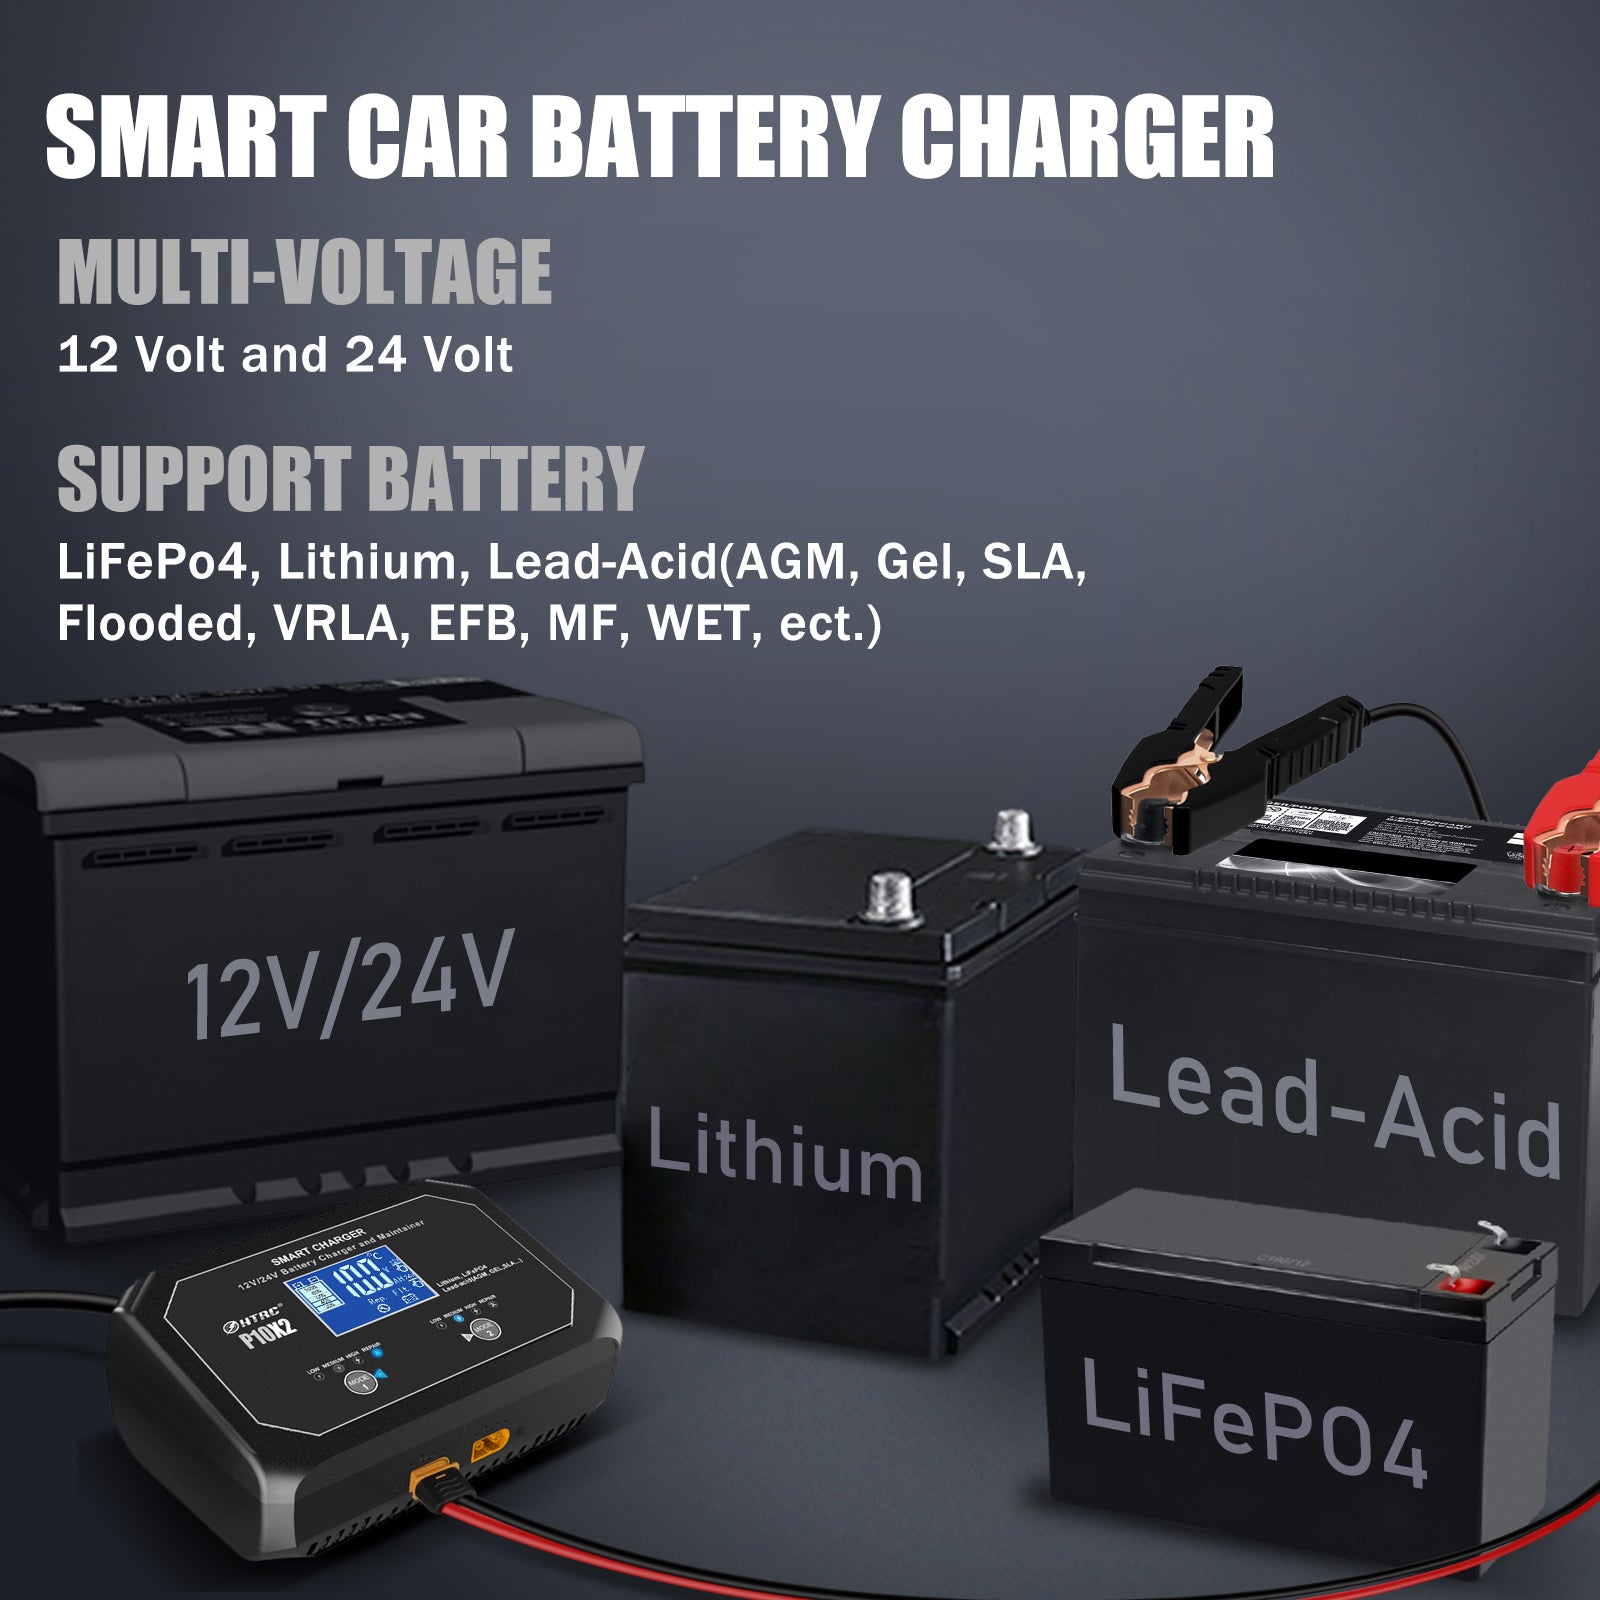 12-Amp Fully-Automatic Smart Charger, Truck Battery Charger Heavy  Duty,Battery Charger, LiFePO4 Battery Charger,Battery Maintainer, Trickle  Charger